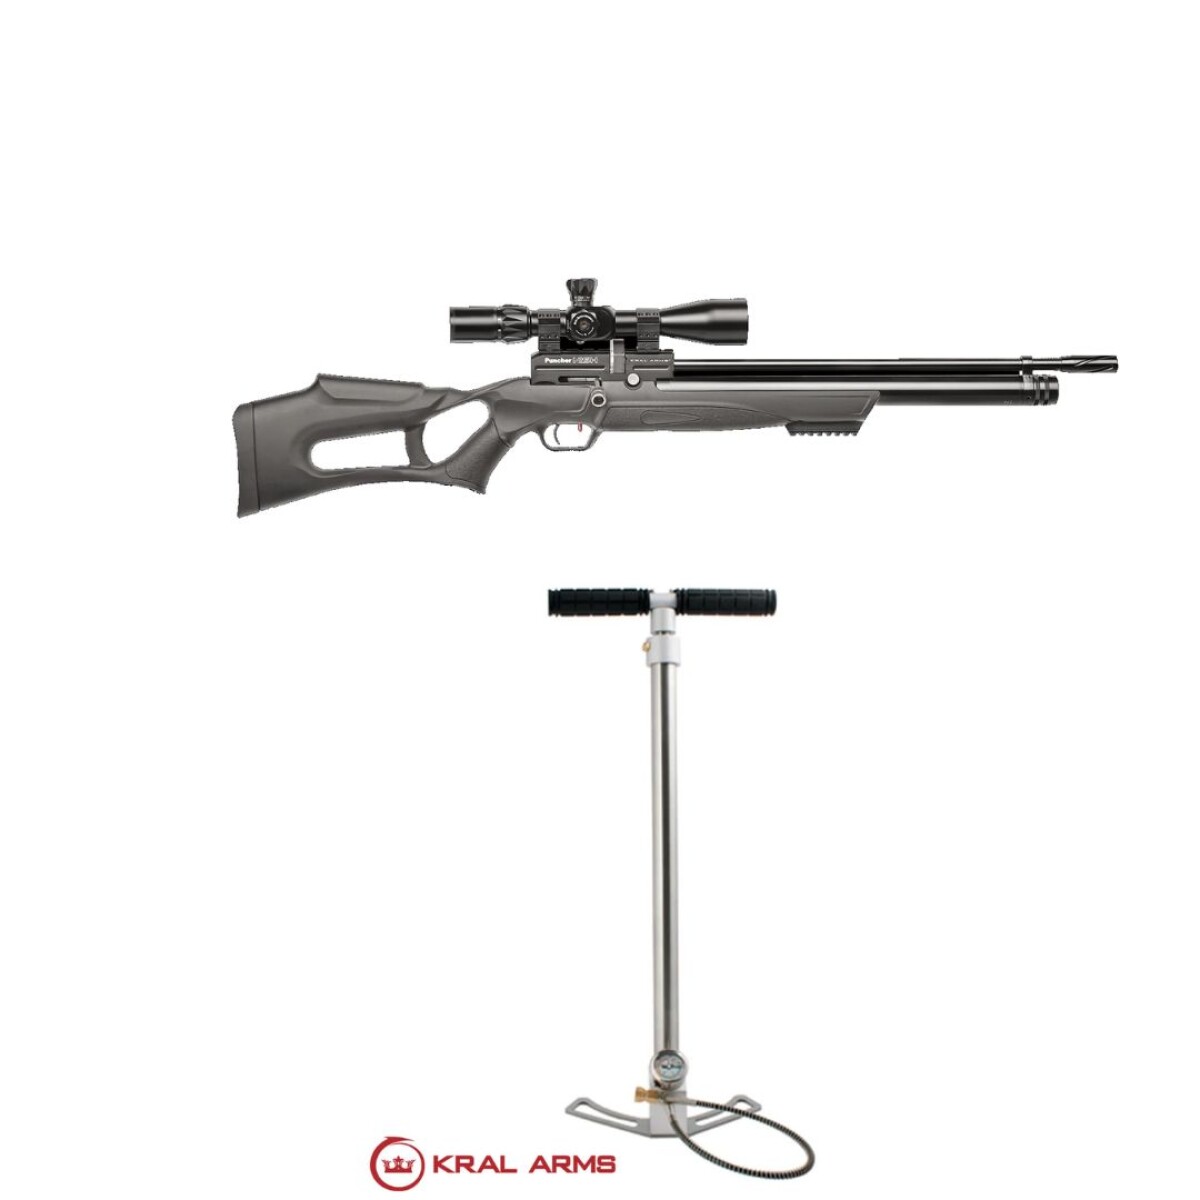 Rifle Chumbera PCP Puncher Nish S Cal 6,35mm + Inflador de mano - Kral Arms 